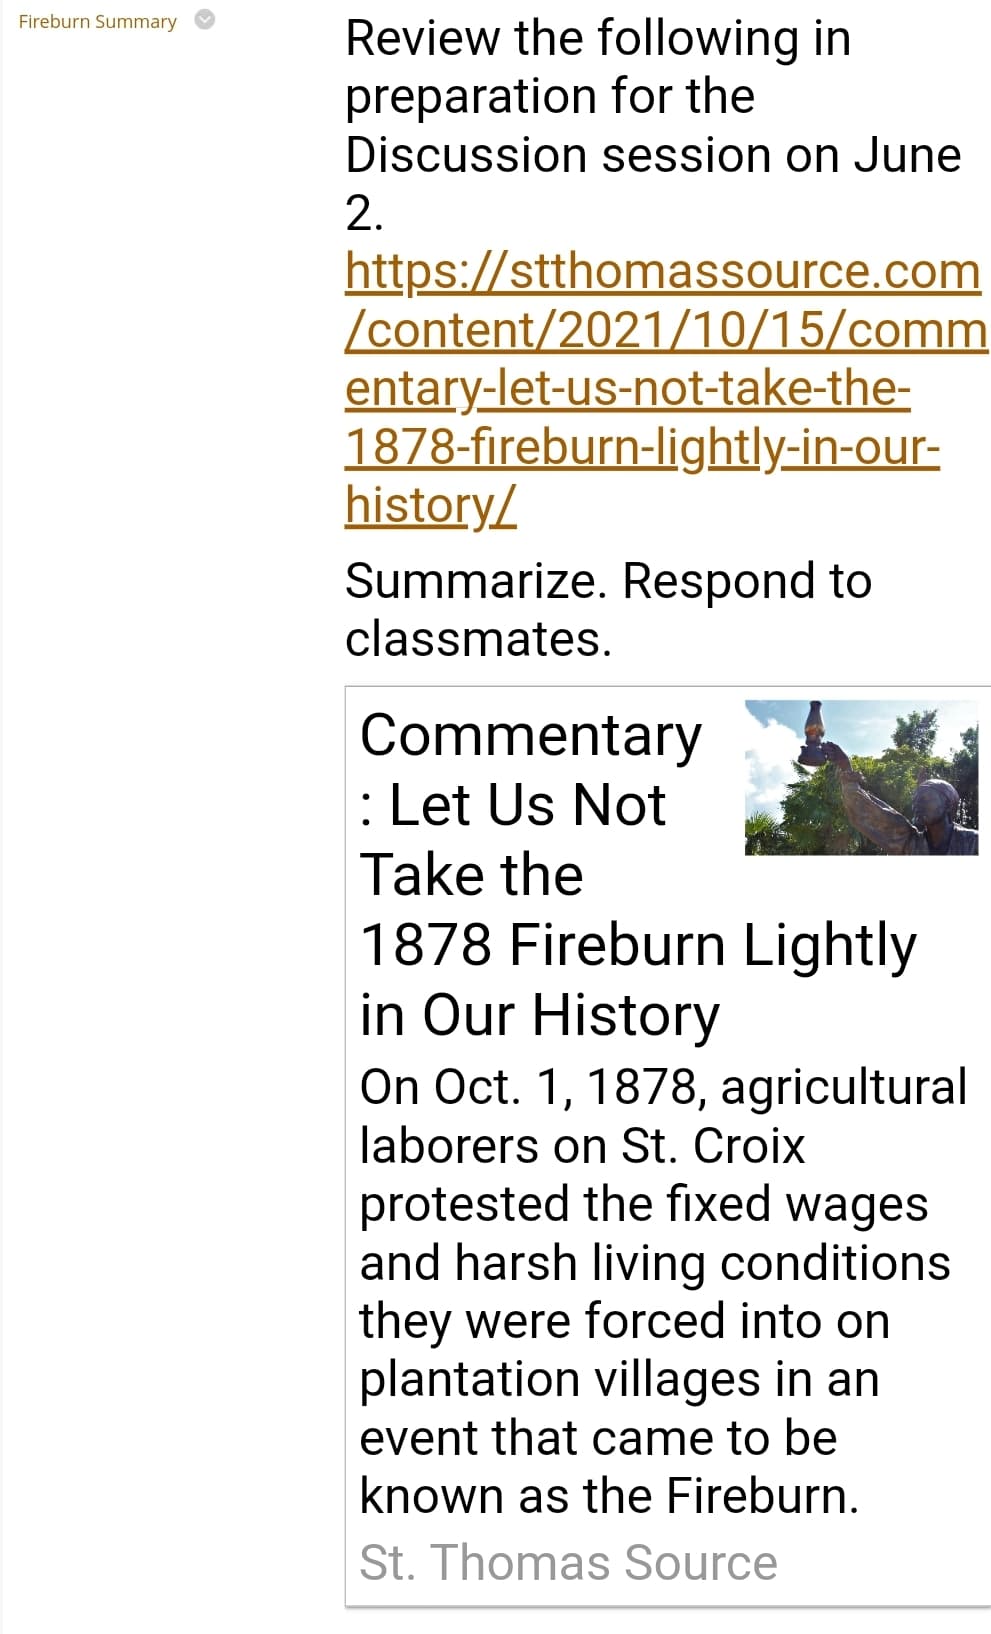 Fireburn Summary
Review the following in
for the
preparation
Discussion session on June
2.
https://stthomassource.com
/content/2021/10/15/comm
entary-let-us-not-take-the-
1878-fireburn-lightly-in-our-
history/
Summarize. Respond to
classmates.
Commentary
: Let Us Not
Take the
1878 Fireburn Lightly
in Our History
On Oct. 1, 1878, agricultural
laborers on St. Croix
protested the fixed wages
and harsh living conditions
they were forced into on
plantation villages in an
event that came to be
known as the Fireburn.
St. Thomas Source